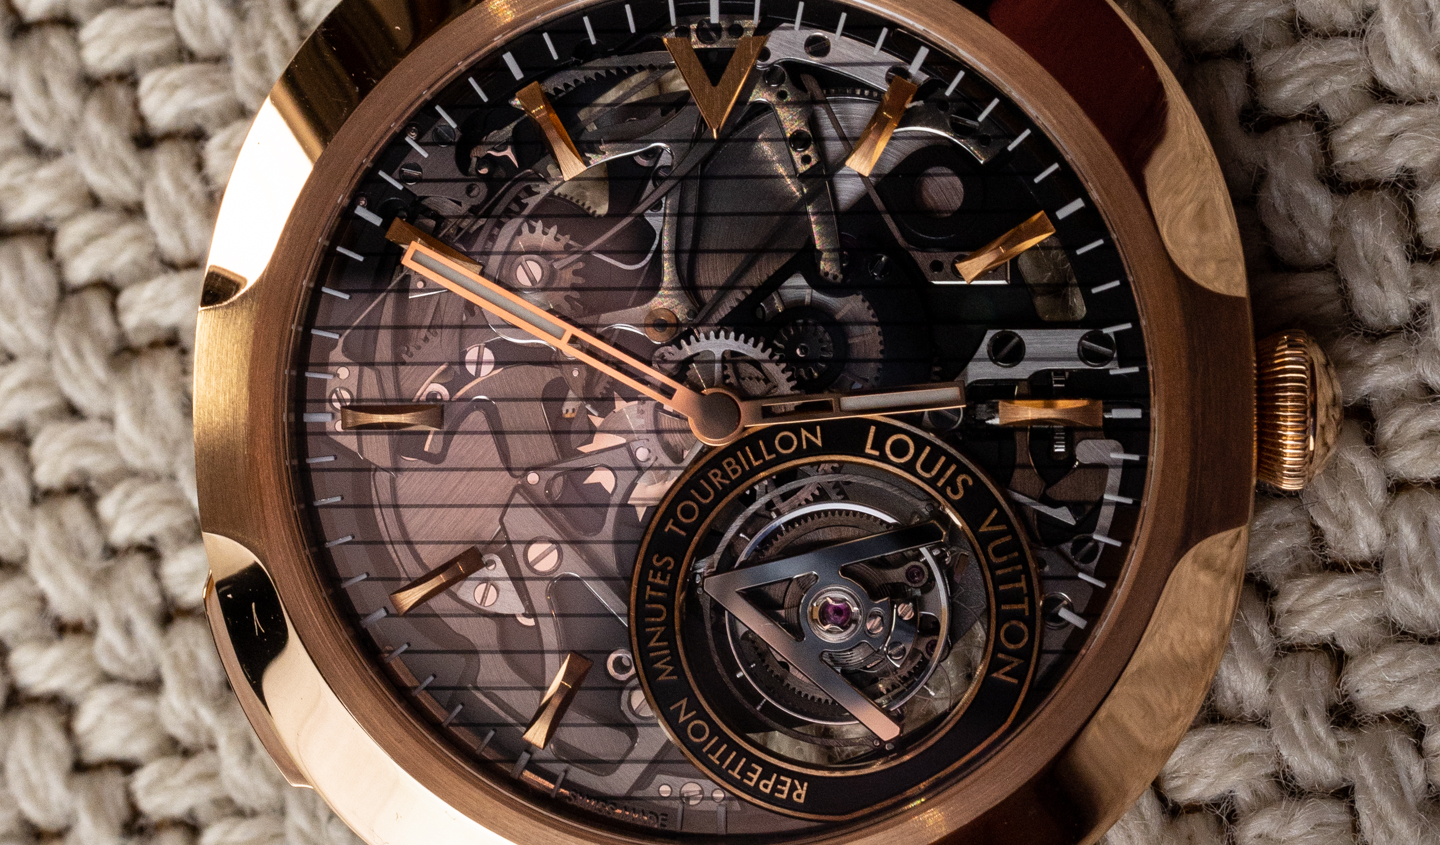 The craziest Louis Vuitton, Voyager Minute Repeater Flying